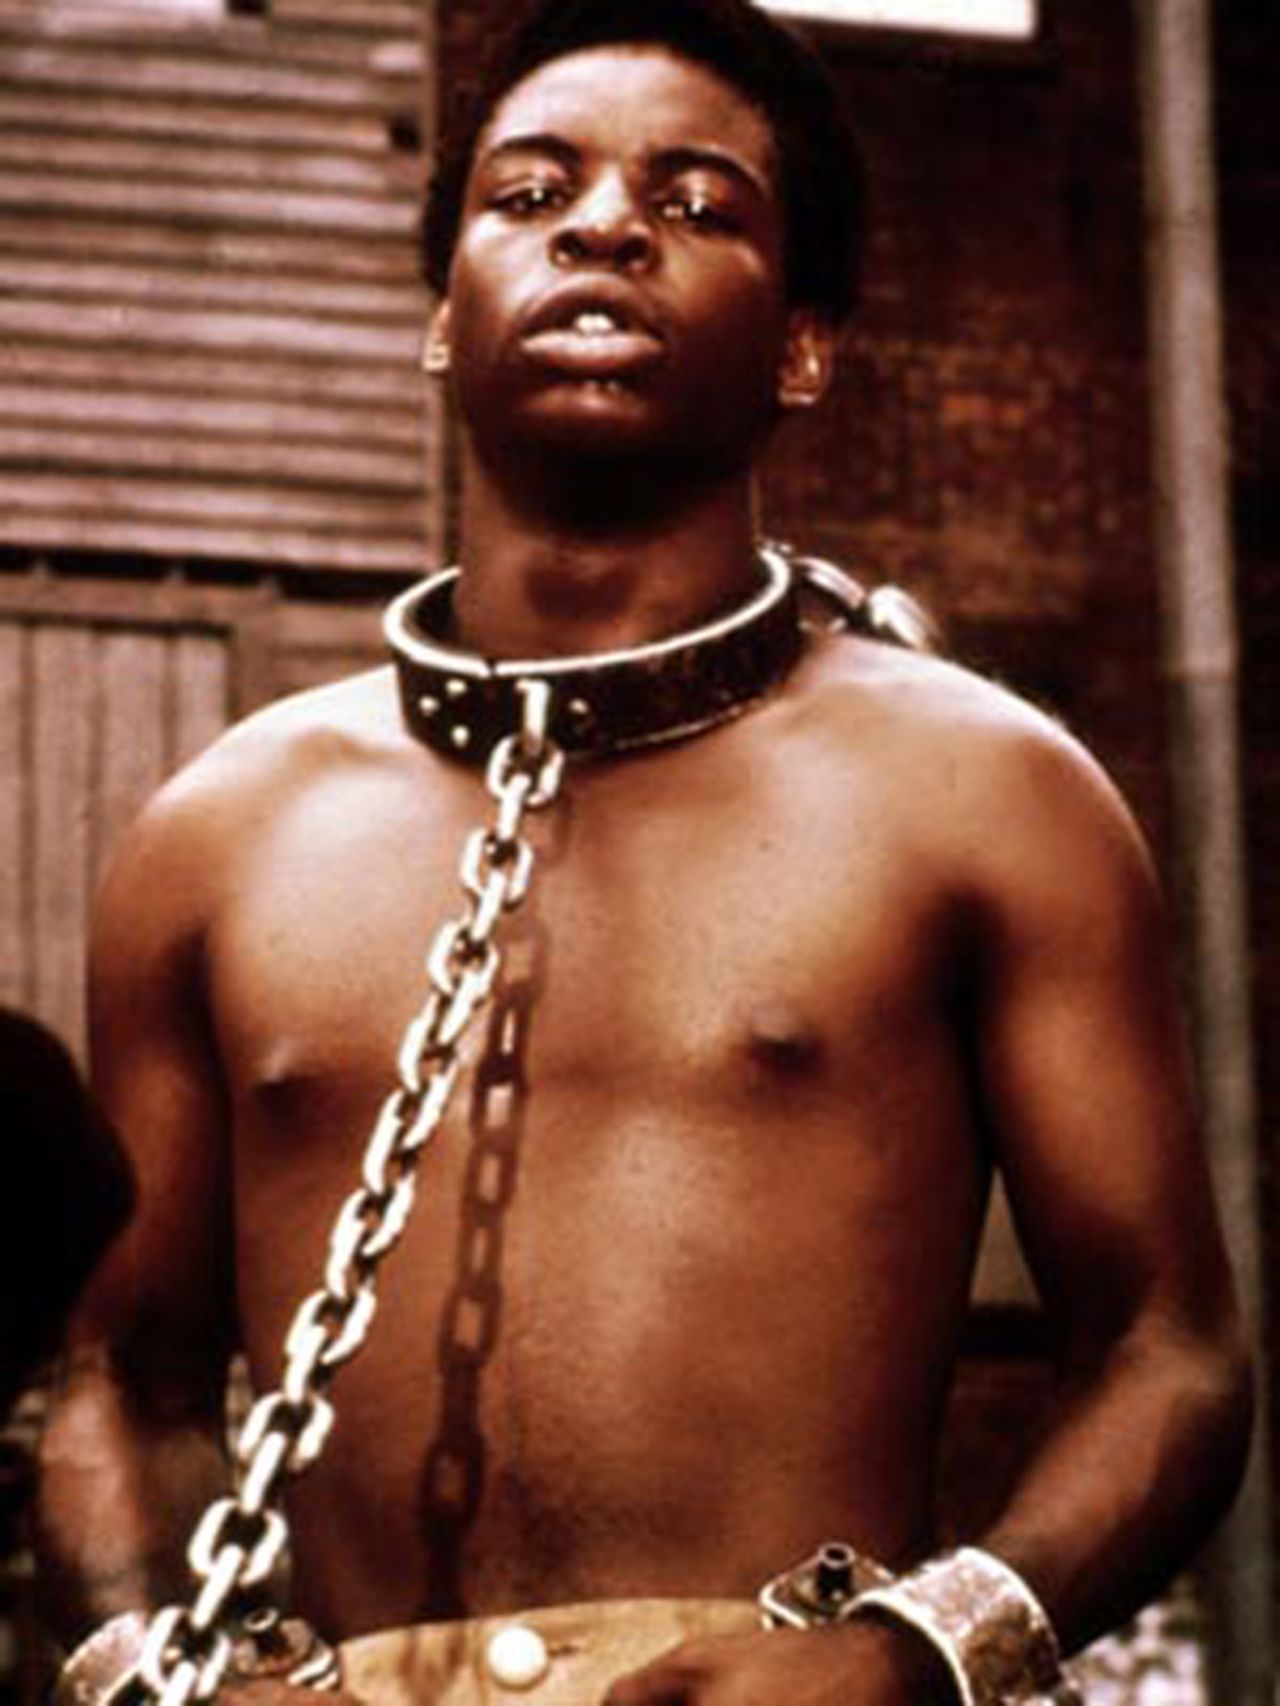 American actor LeVar Burton played the Gambian slave Kinta Kunte in the 1977 TV series. A&E Networks will be rebooting the series, with Burton as co-producer.